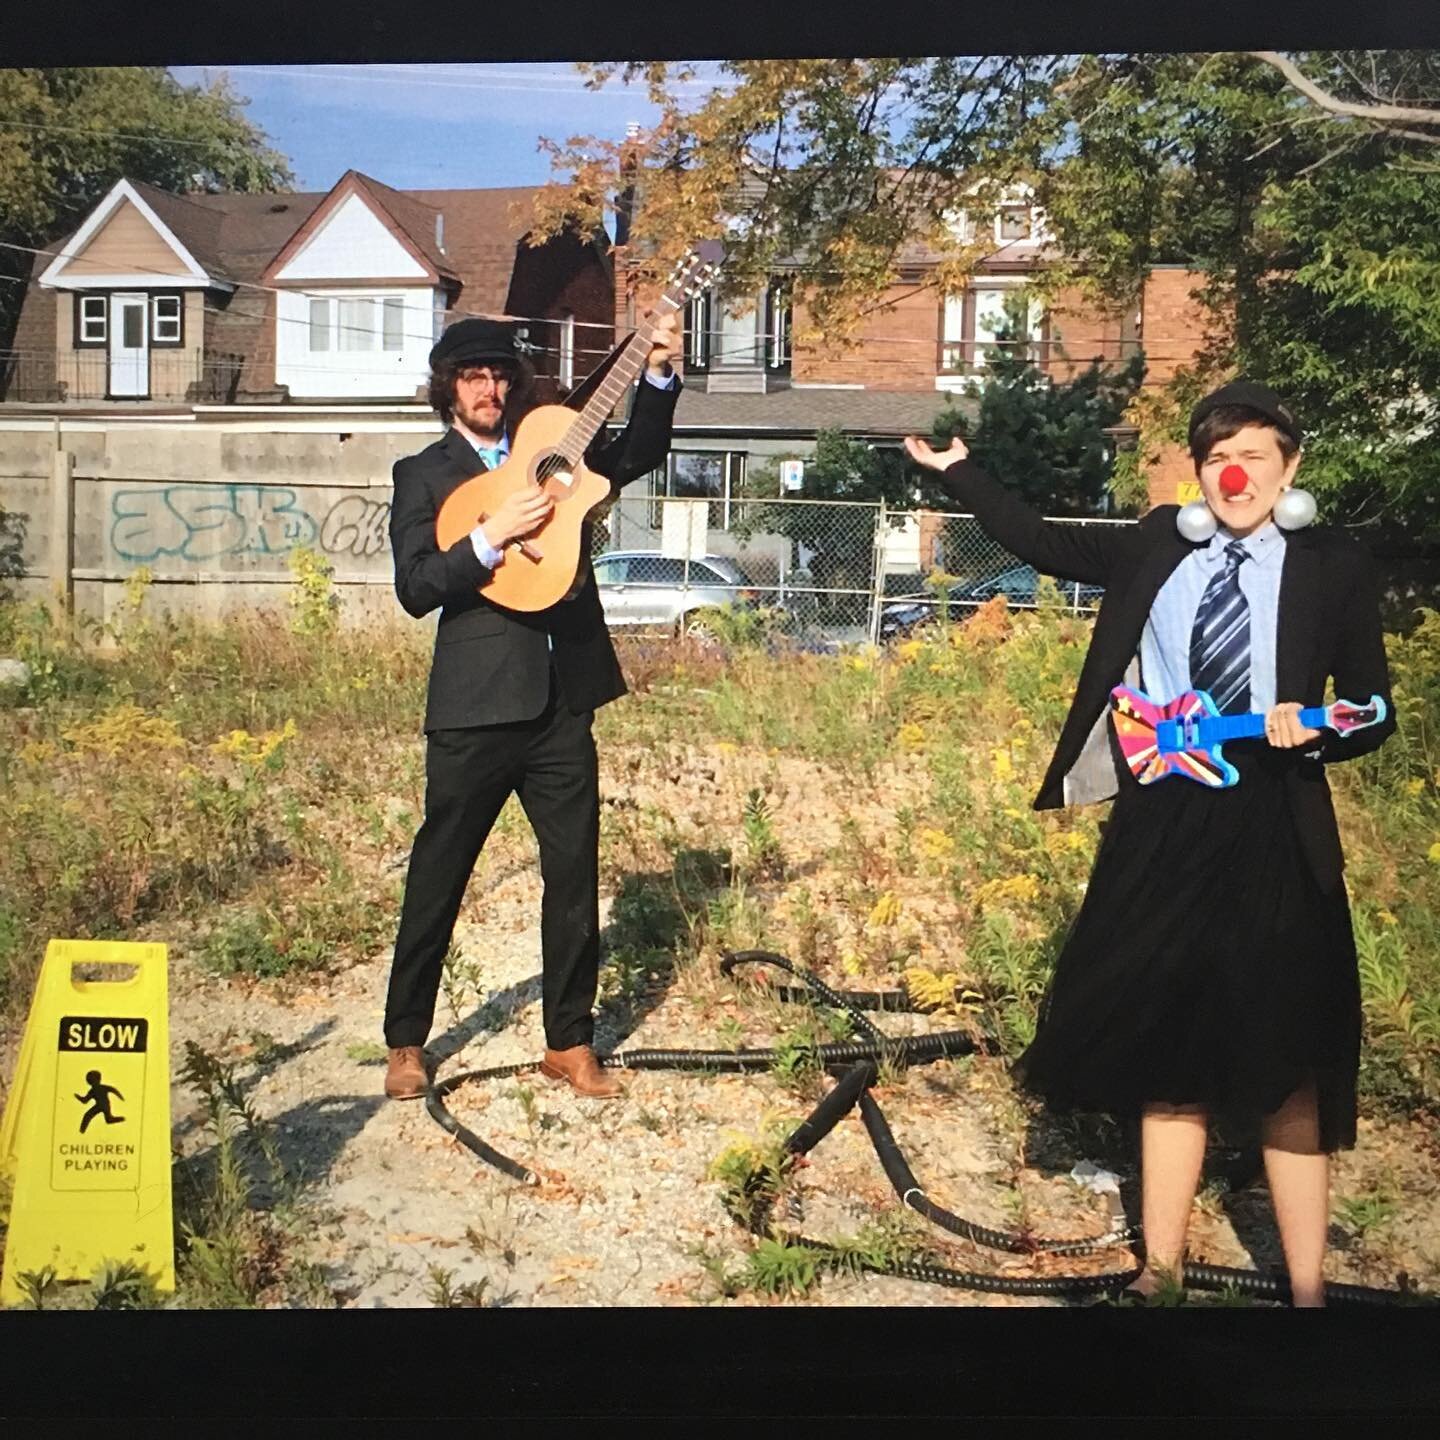 Oli Oli Ennui and their side kick BruceBobert WillowsWillis rocking the Toronto Rail Path with some Dead Kennedy&rsquo;s tunes yesterday afternoon. 🤡
*
Catch these two gracing insta @jo_dontgothere AND do not forget to go to @workmanartsto to get yo